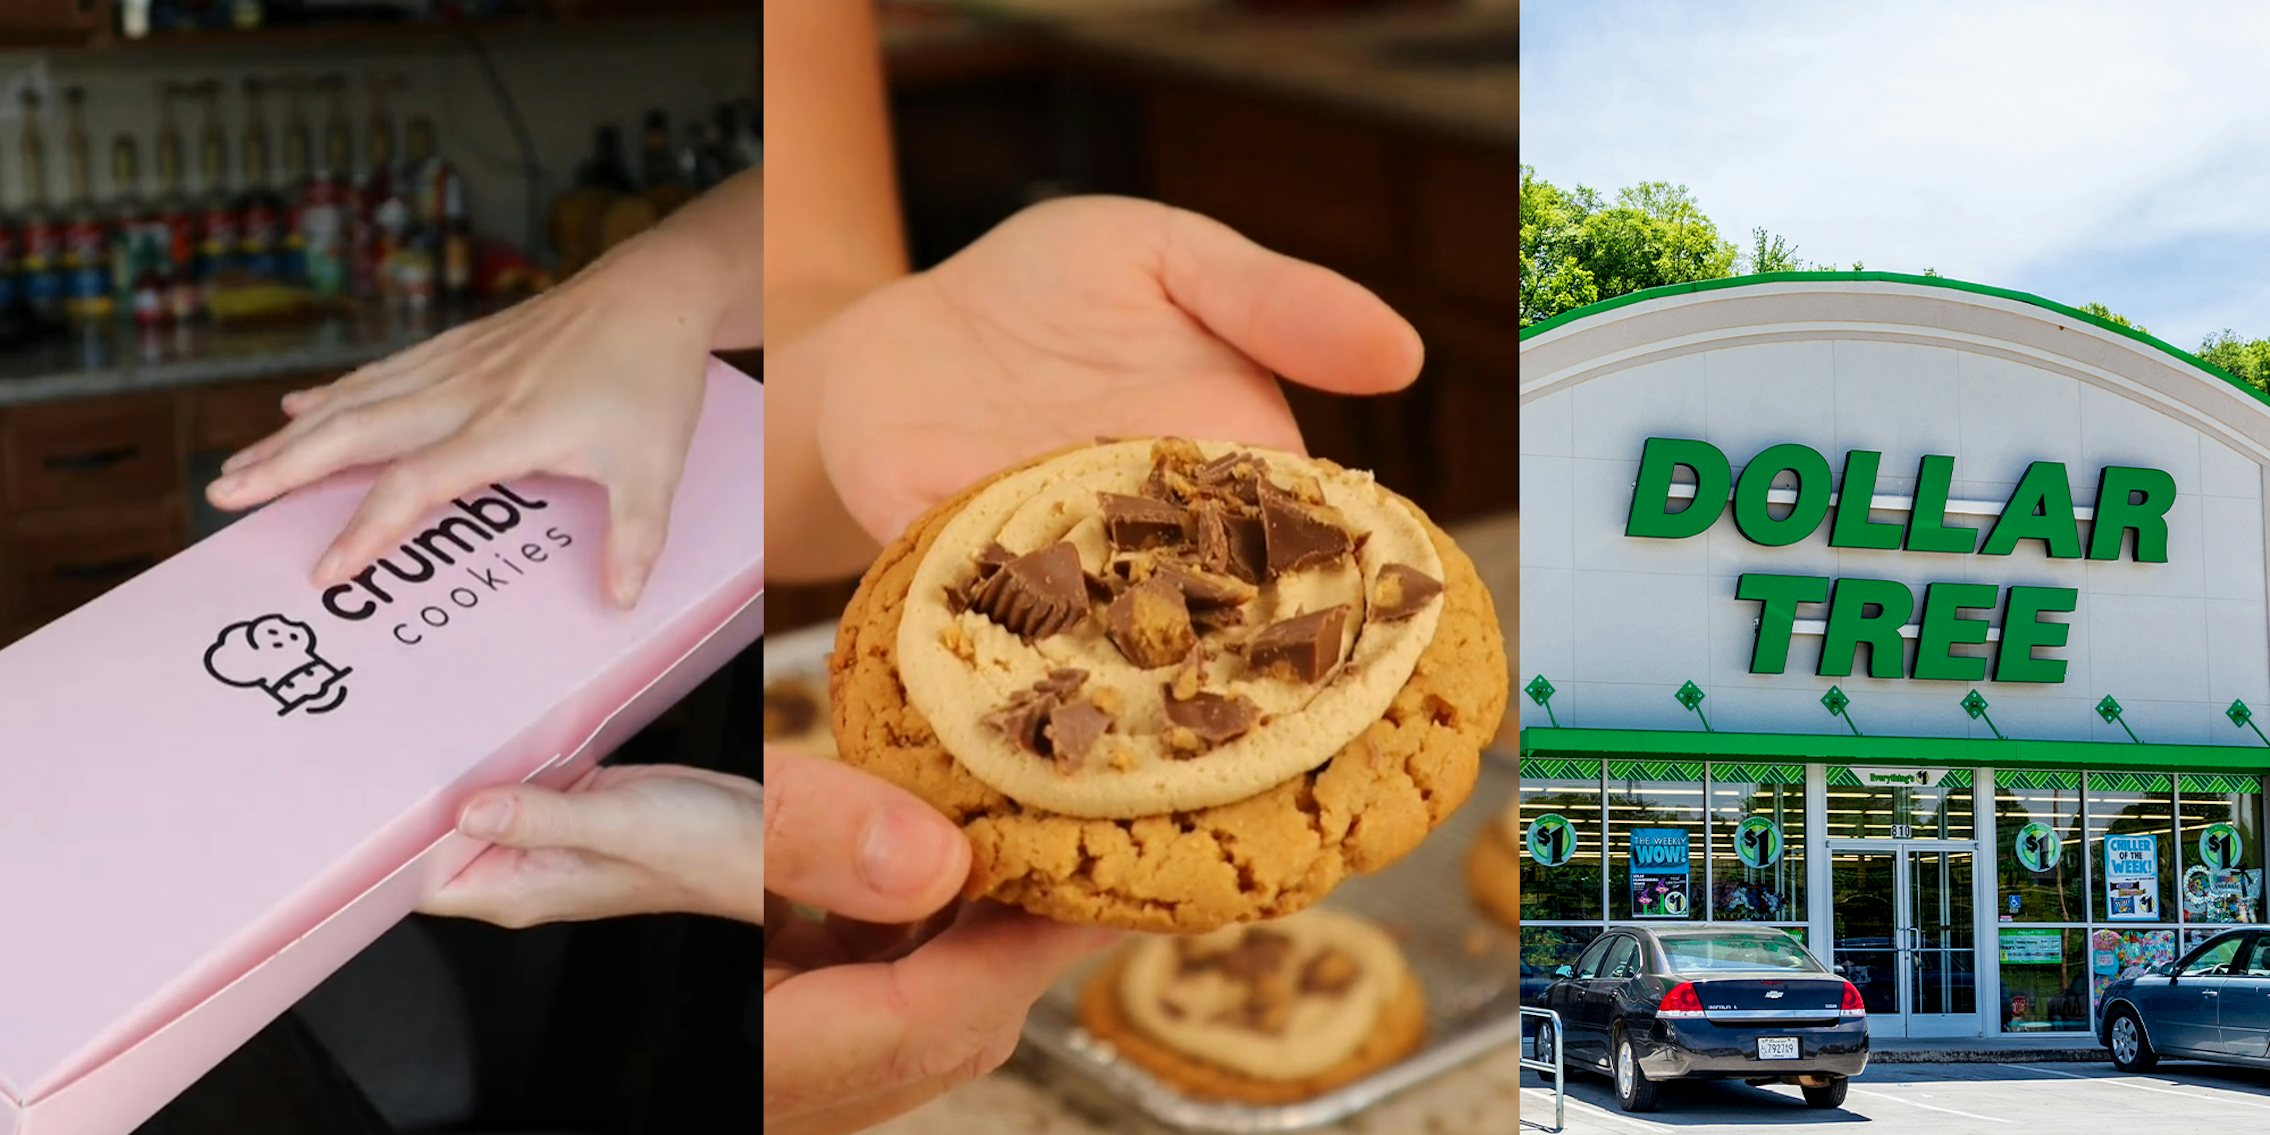 Customer makes Crumbl cookies dupes from Dollar Tree ingredients